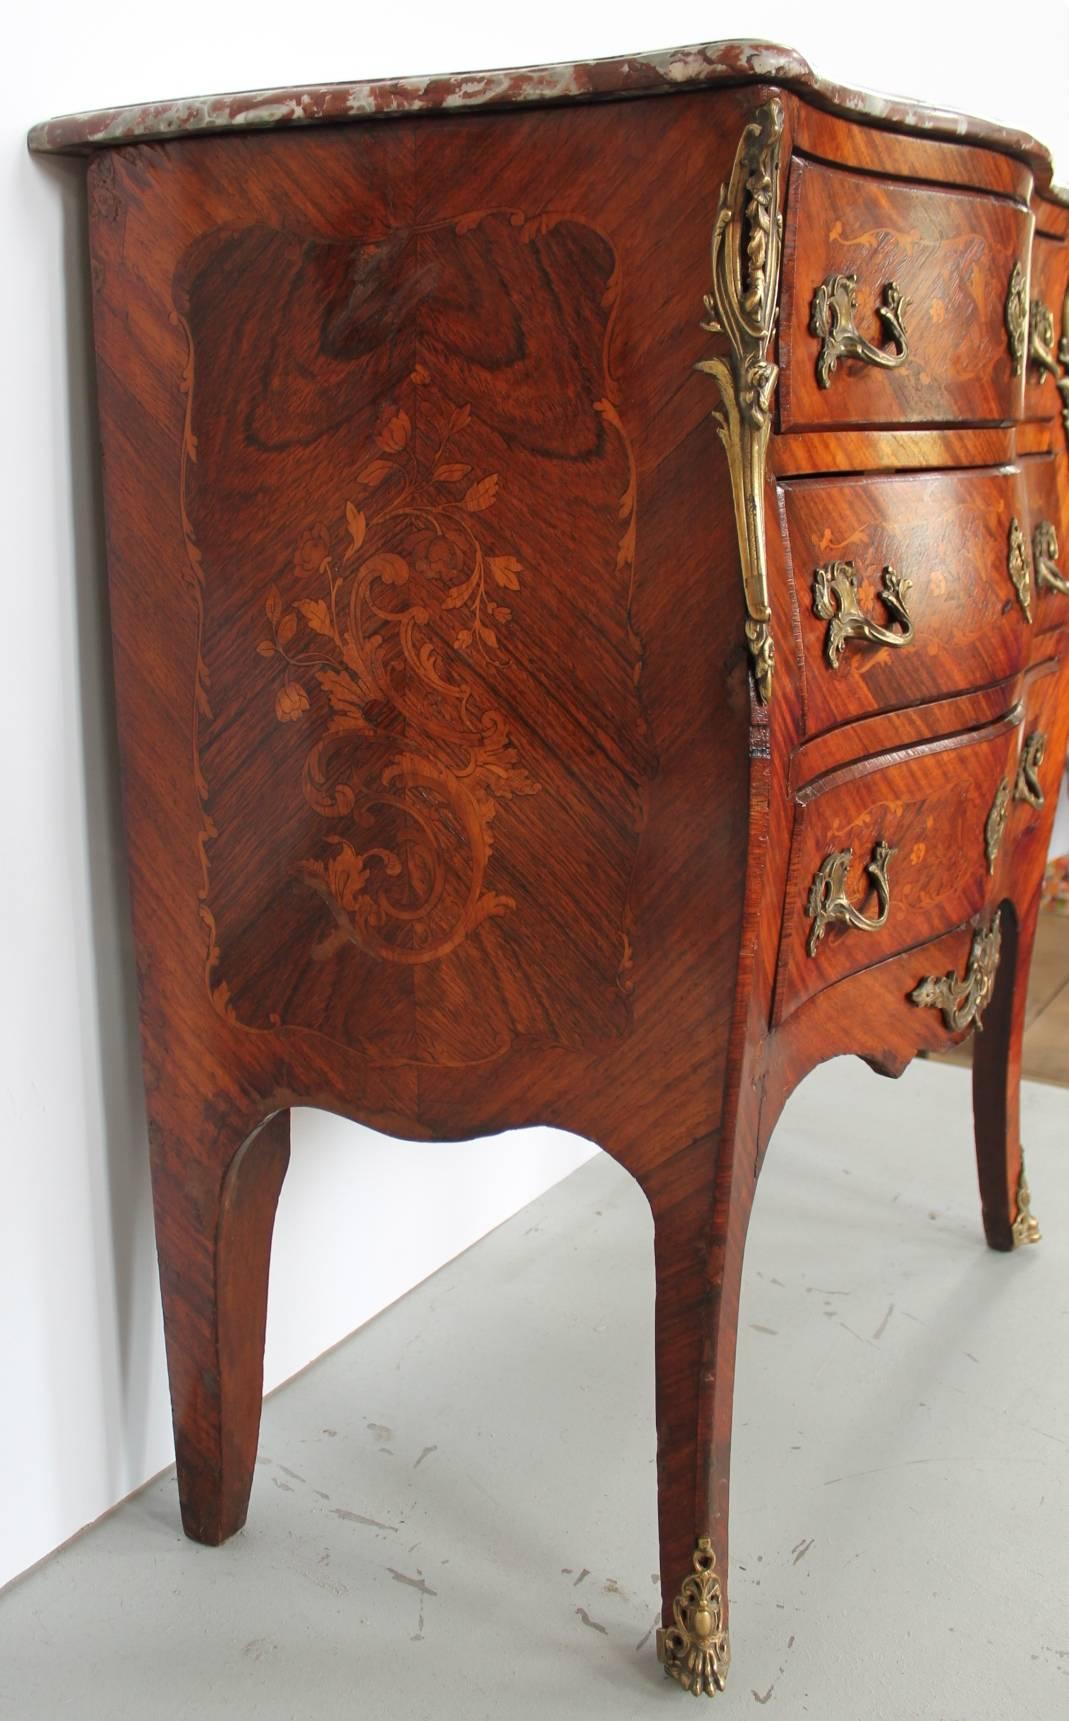 French Louis XV Style Marquetry Inlaid Petite Commode, Late 19th-Early 20th Century For Sale